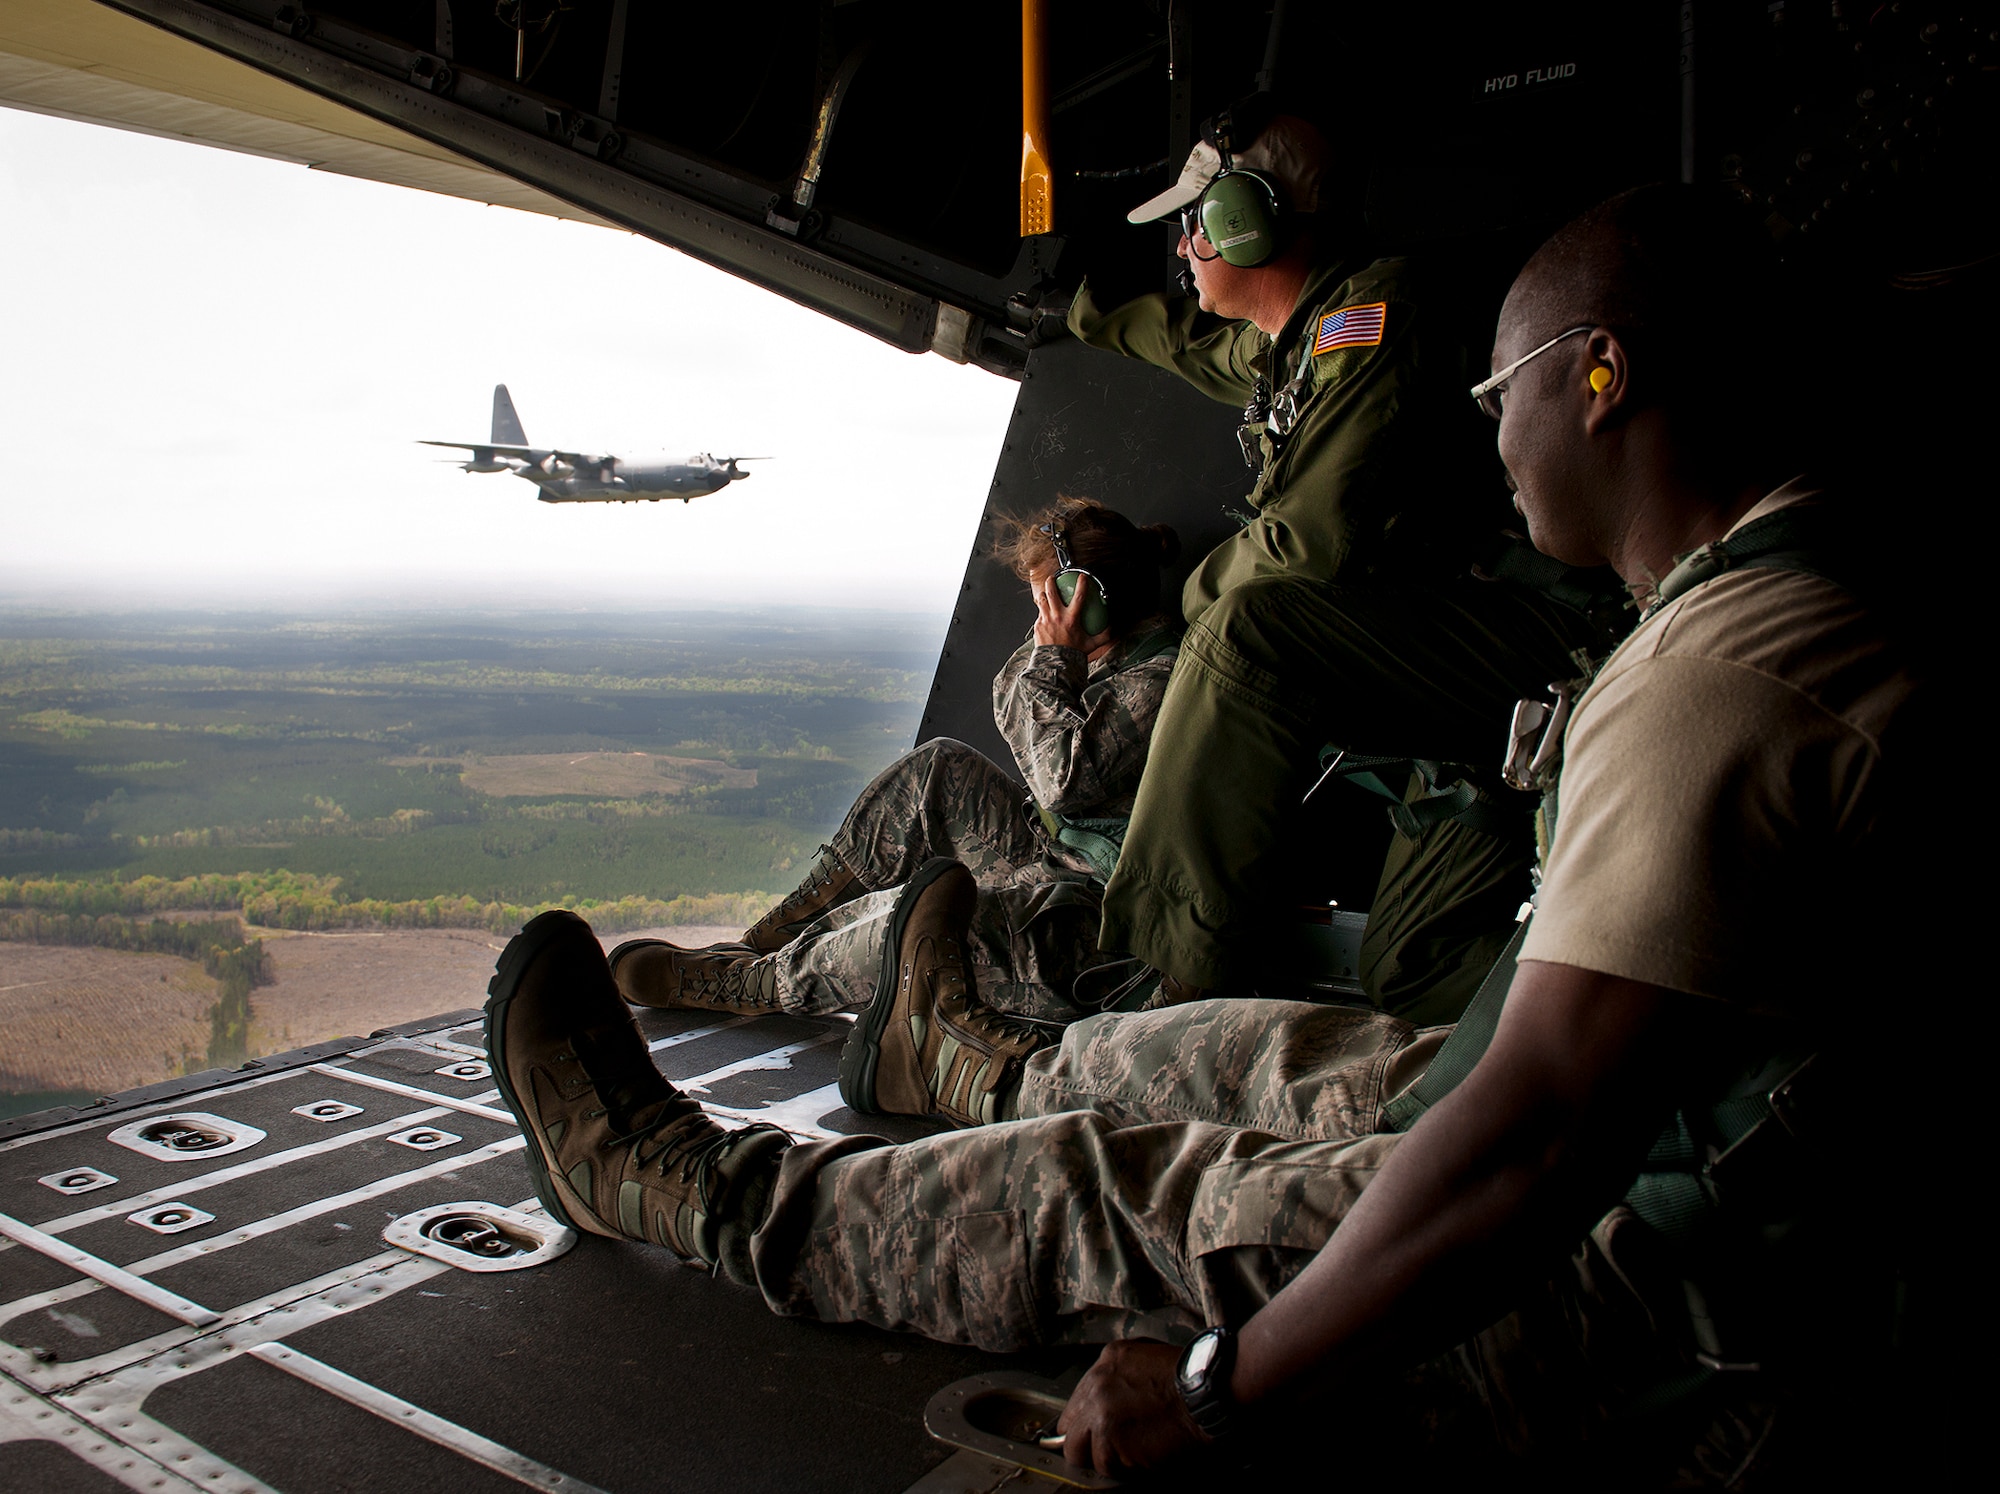 Members of the 919th Special Operations Wing watch the MC-130E Combat Talon I in flight April 15 during the aircraft’s final sortie before retirement. The last five Talons in the Air Force belong to the 919th SOW and are scheduled to be retired at a ceremony April 25.  They will make one final flight to the “boneyard” at Davis-Monthan Air Force Base, Ariz., by the end of the fiscal year.  (U.S. Air Force photo/Tech. Sgt. Samuel King Jr.)